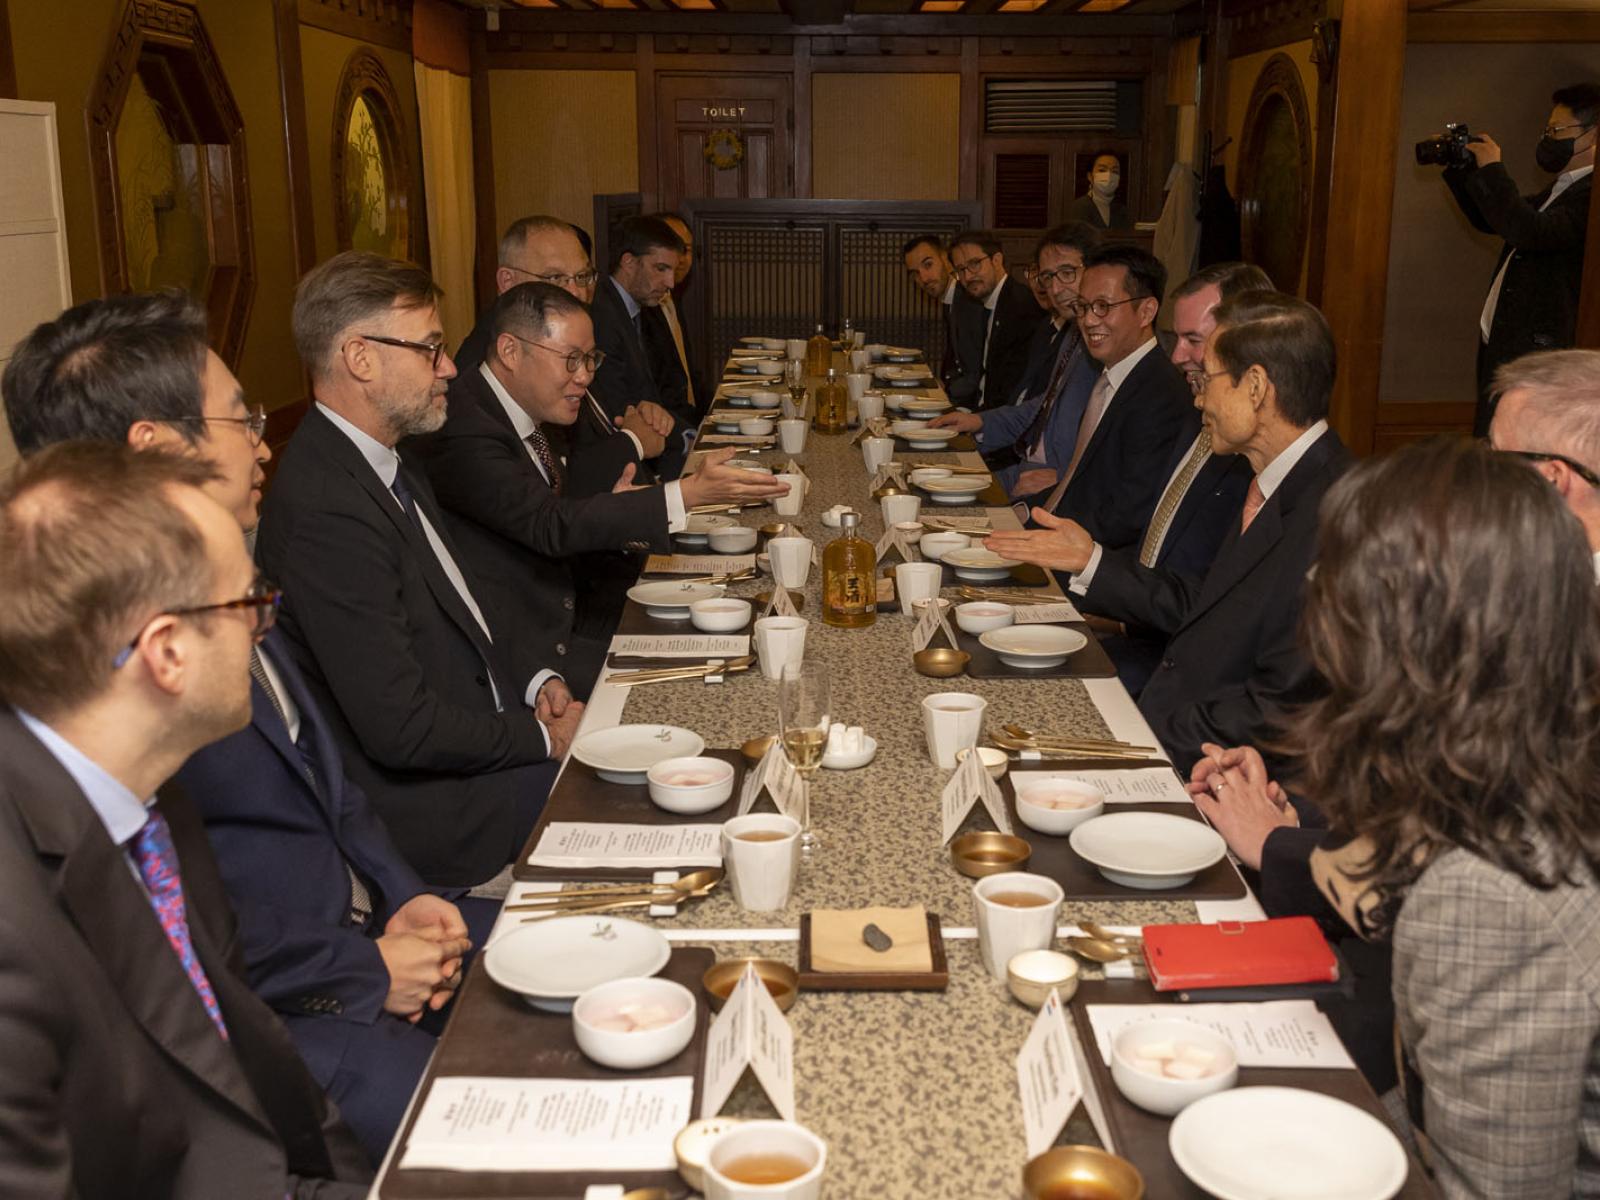 Souvenir picture of the dinner with representatives of Korean companies established in Luxembourg